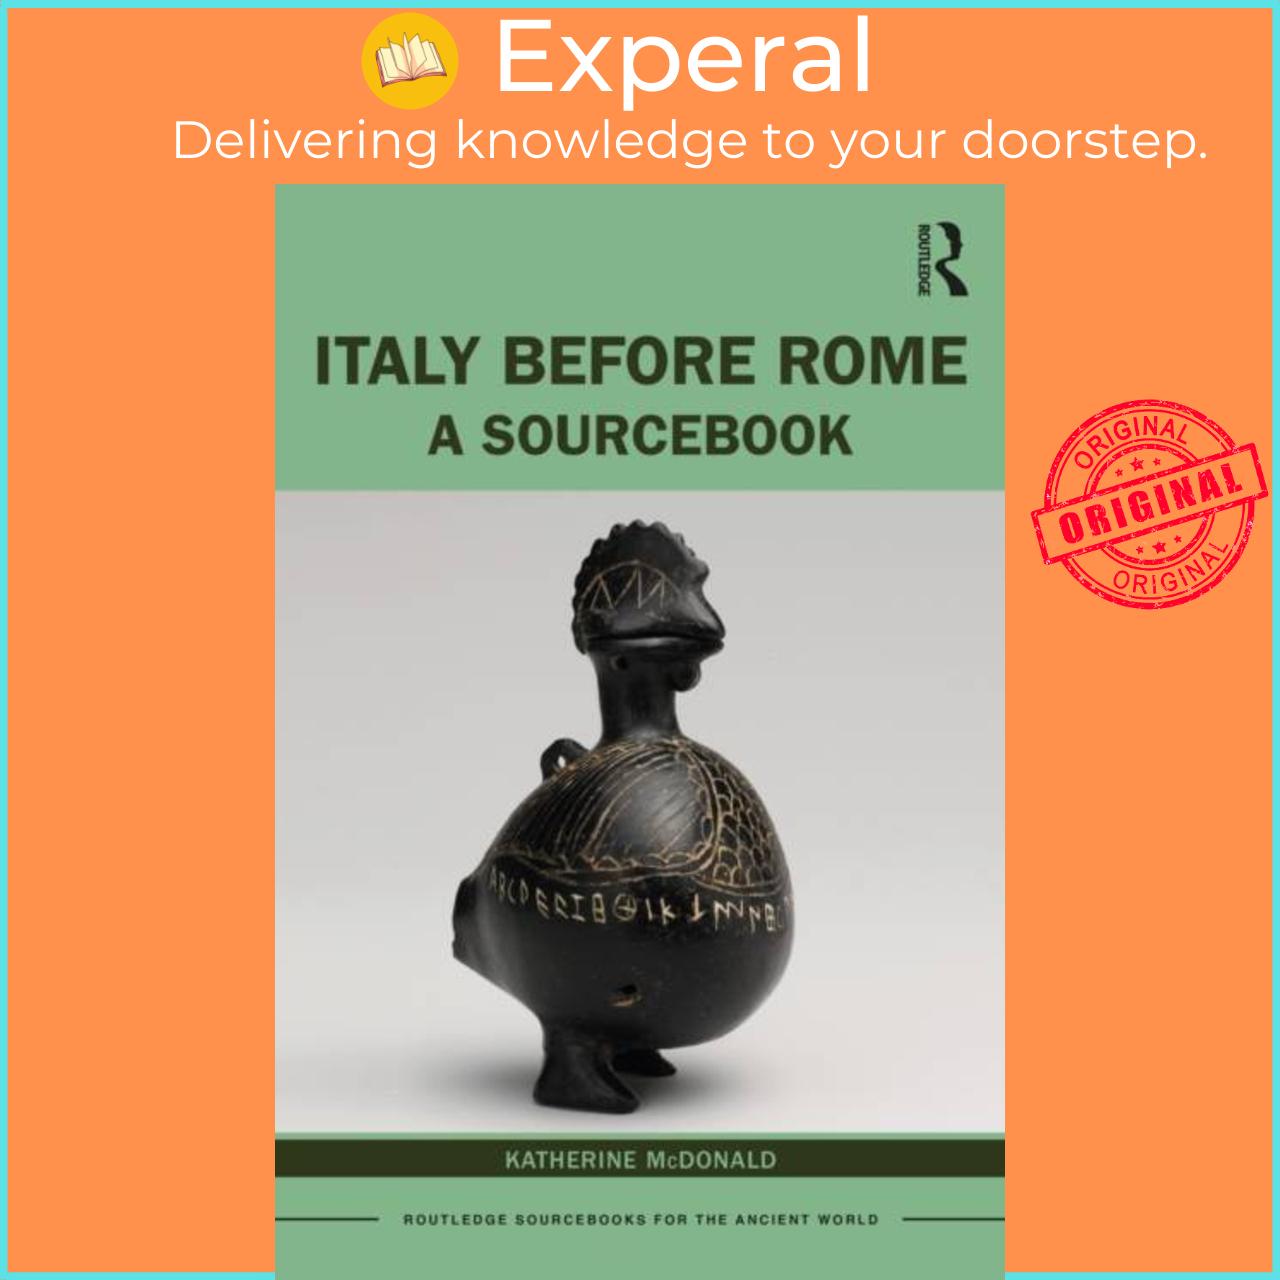 Sách - Italy Before Rome - A Sourcebook by Katherine McDonald (UK edition, paperback)